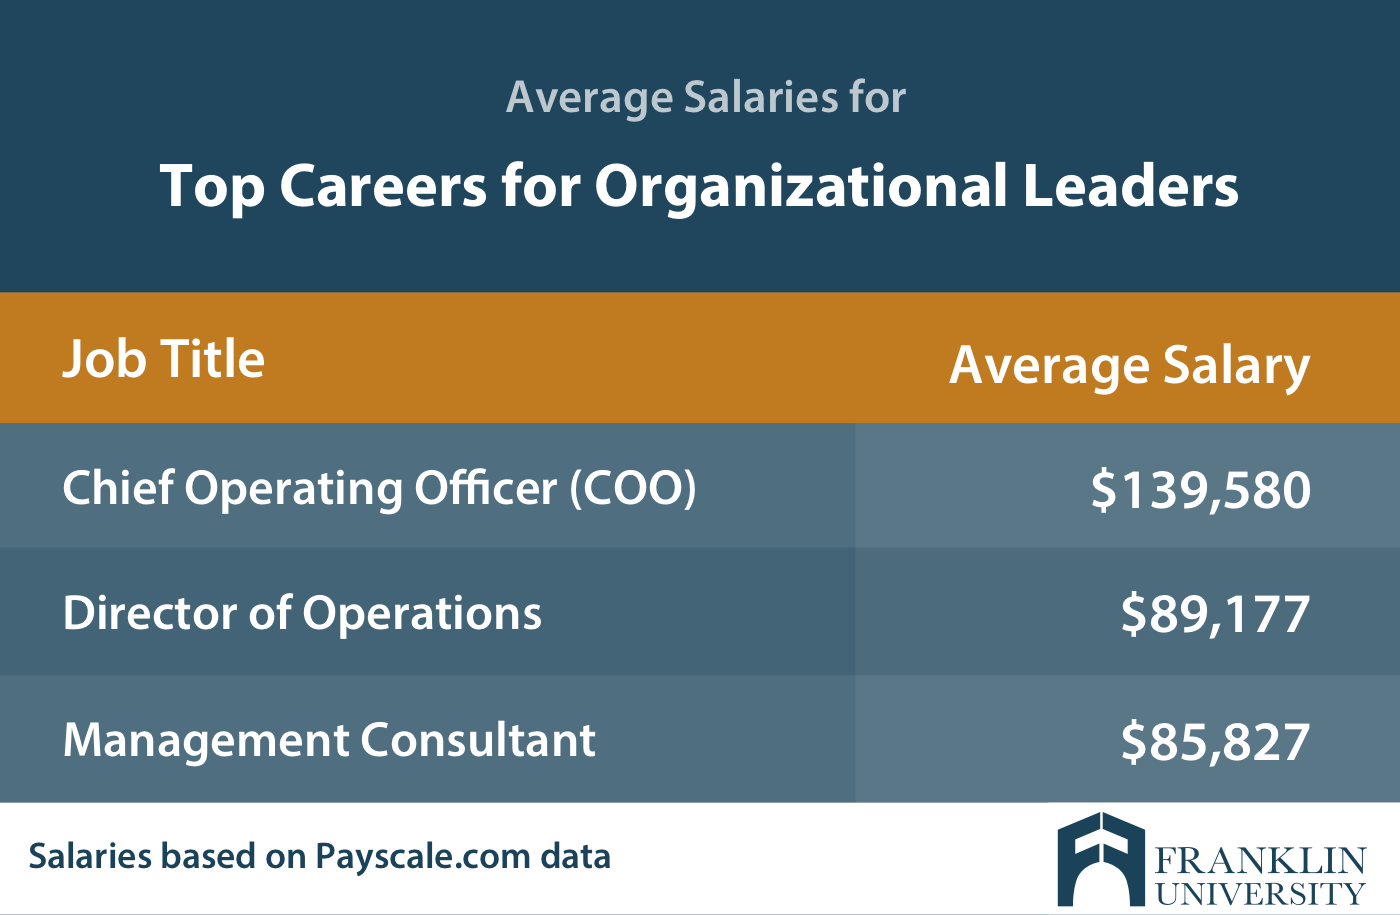 graphic describing the average salaries for top careers for organizational leaders